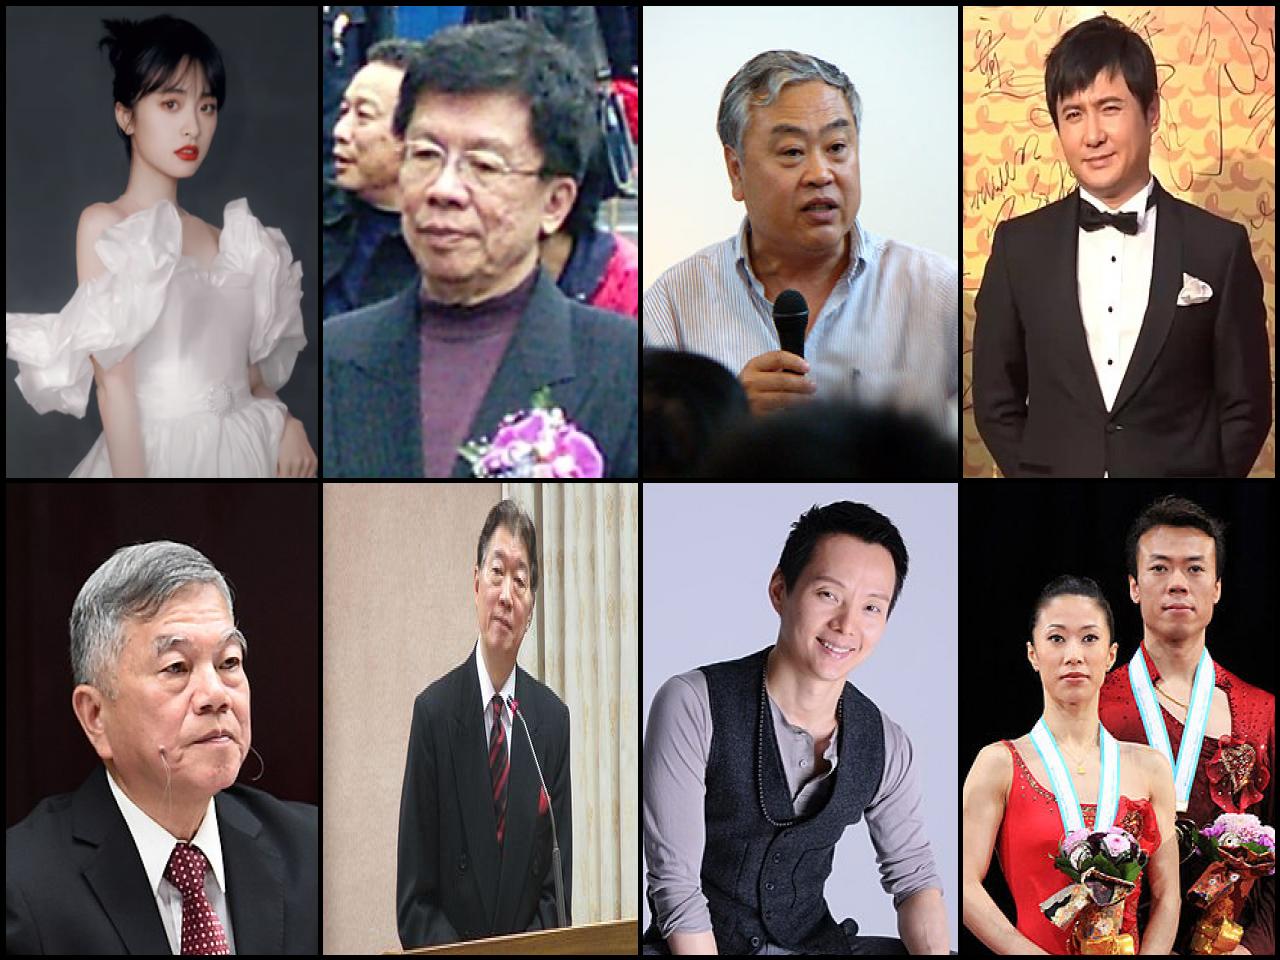 List of Famous people named <b>Shen</b>